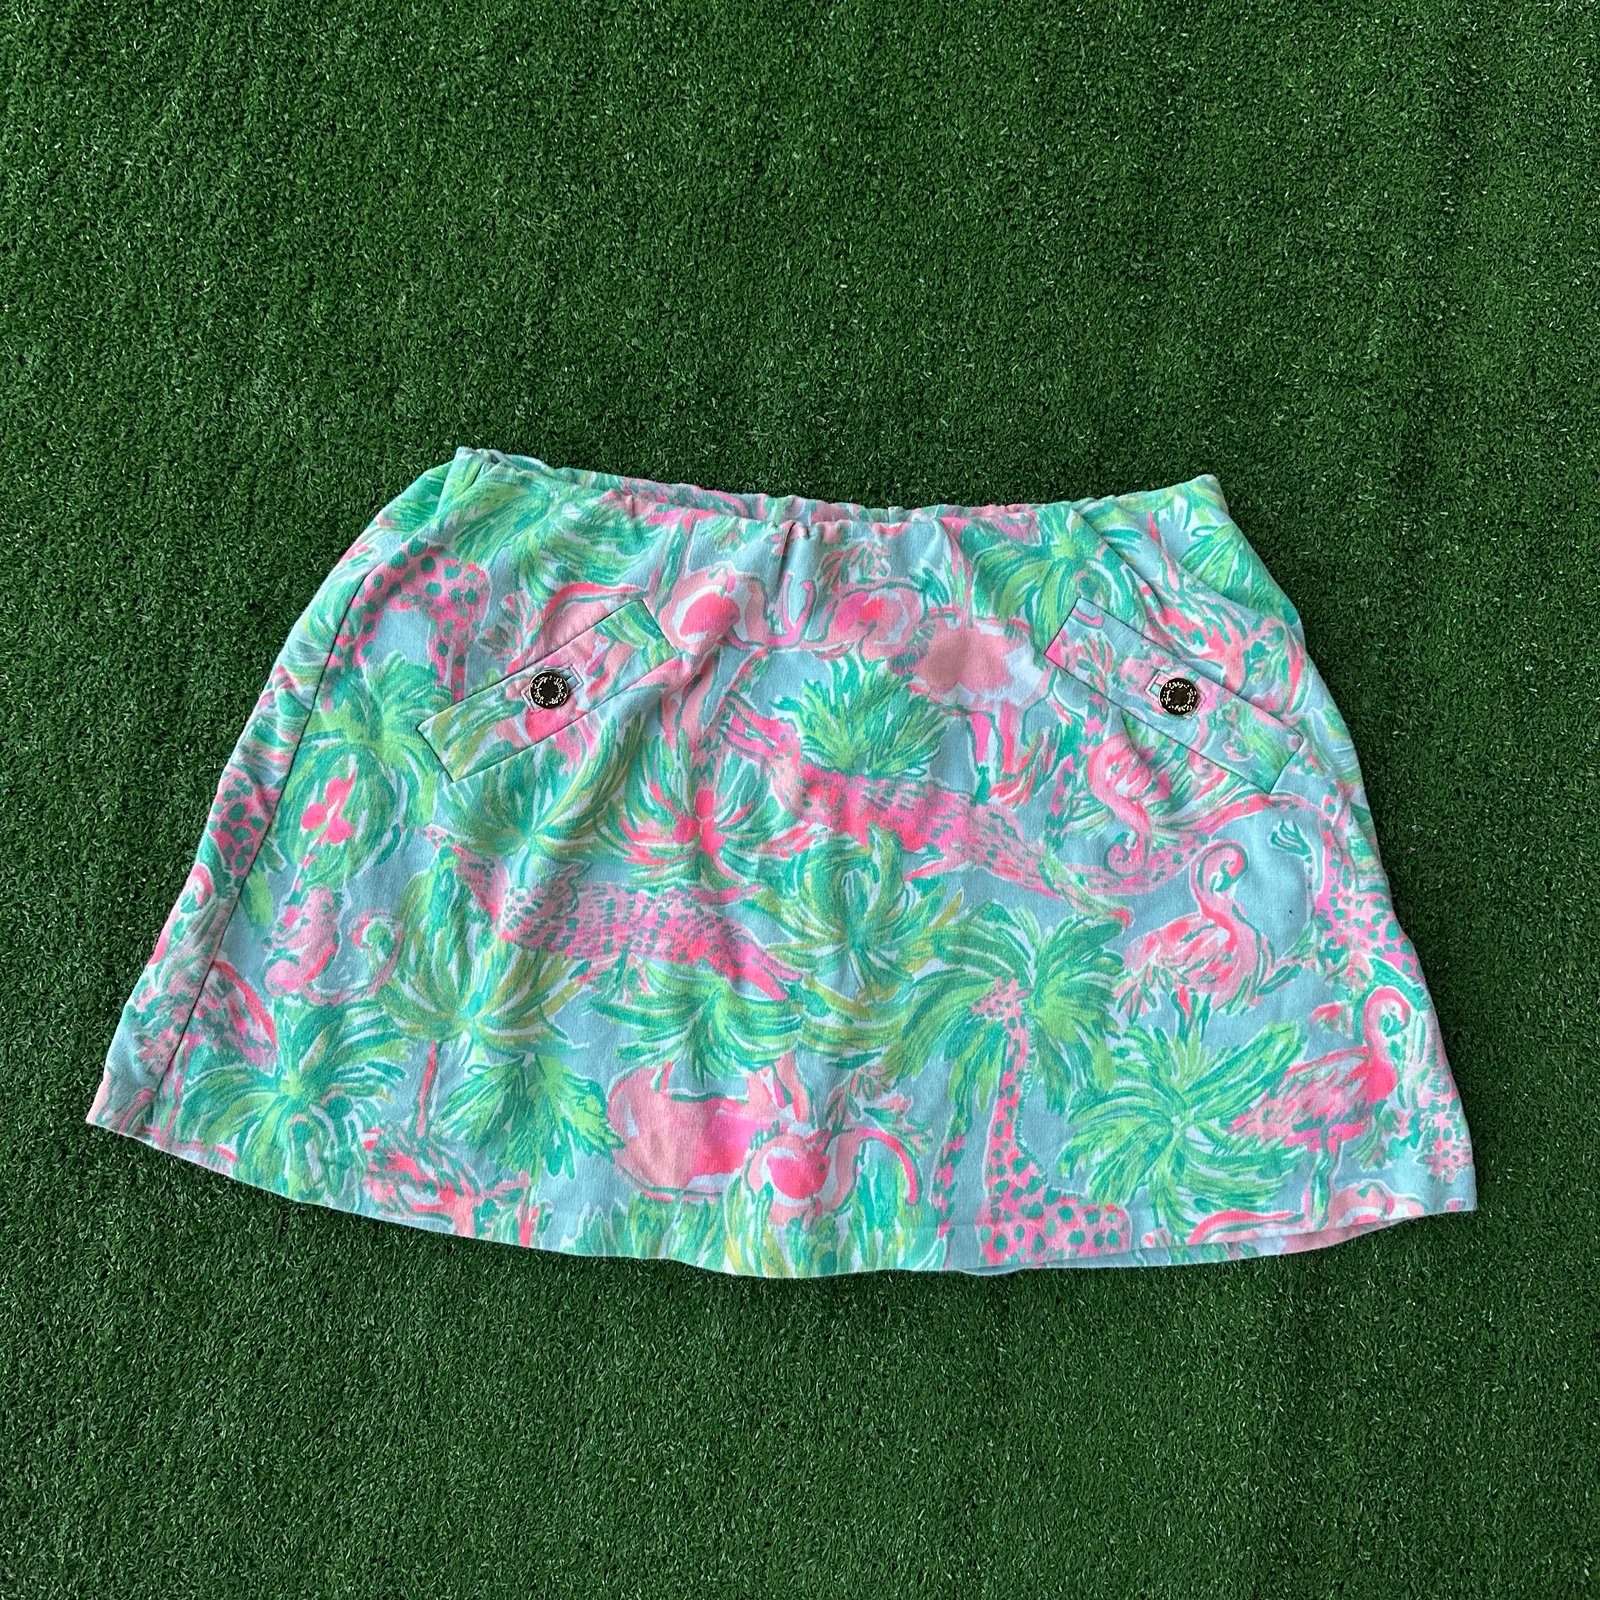 Exclusive lilly pulitzer skirt floral womens skirt size